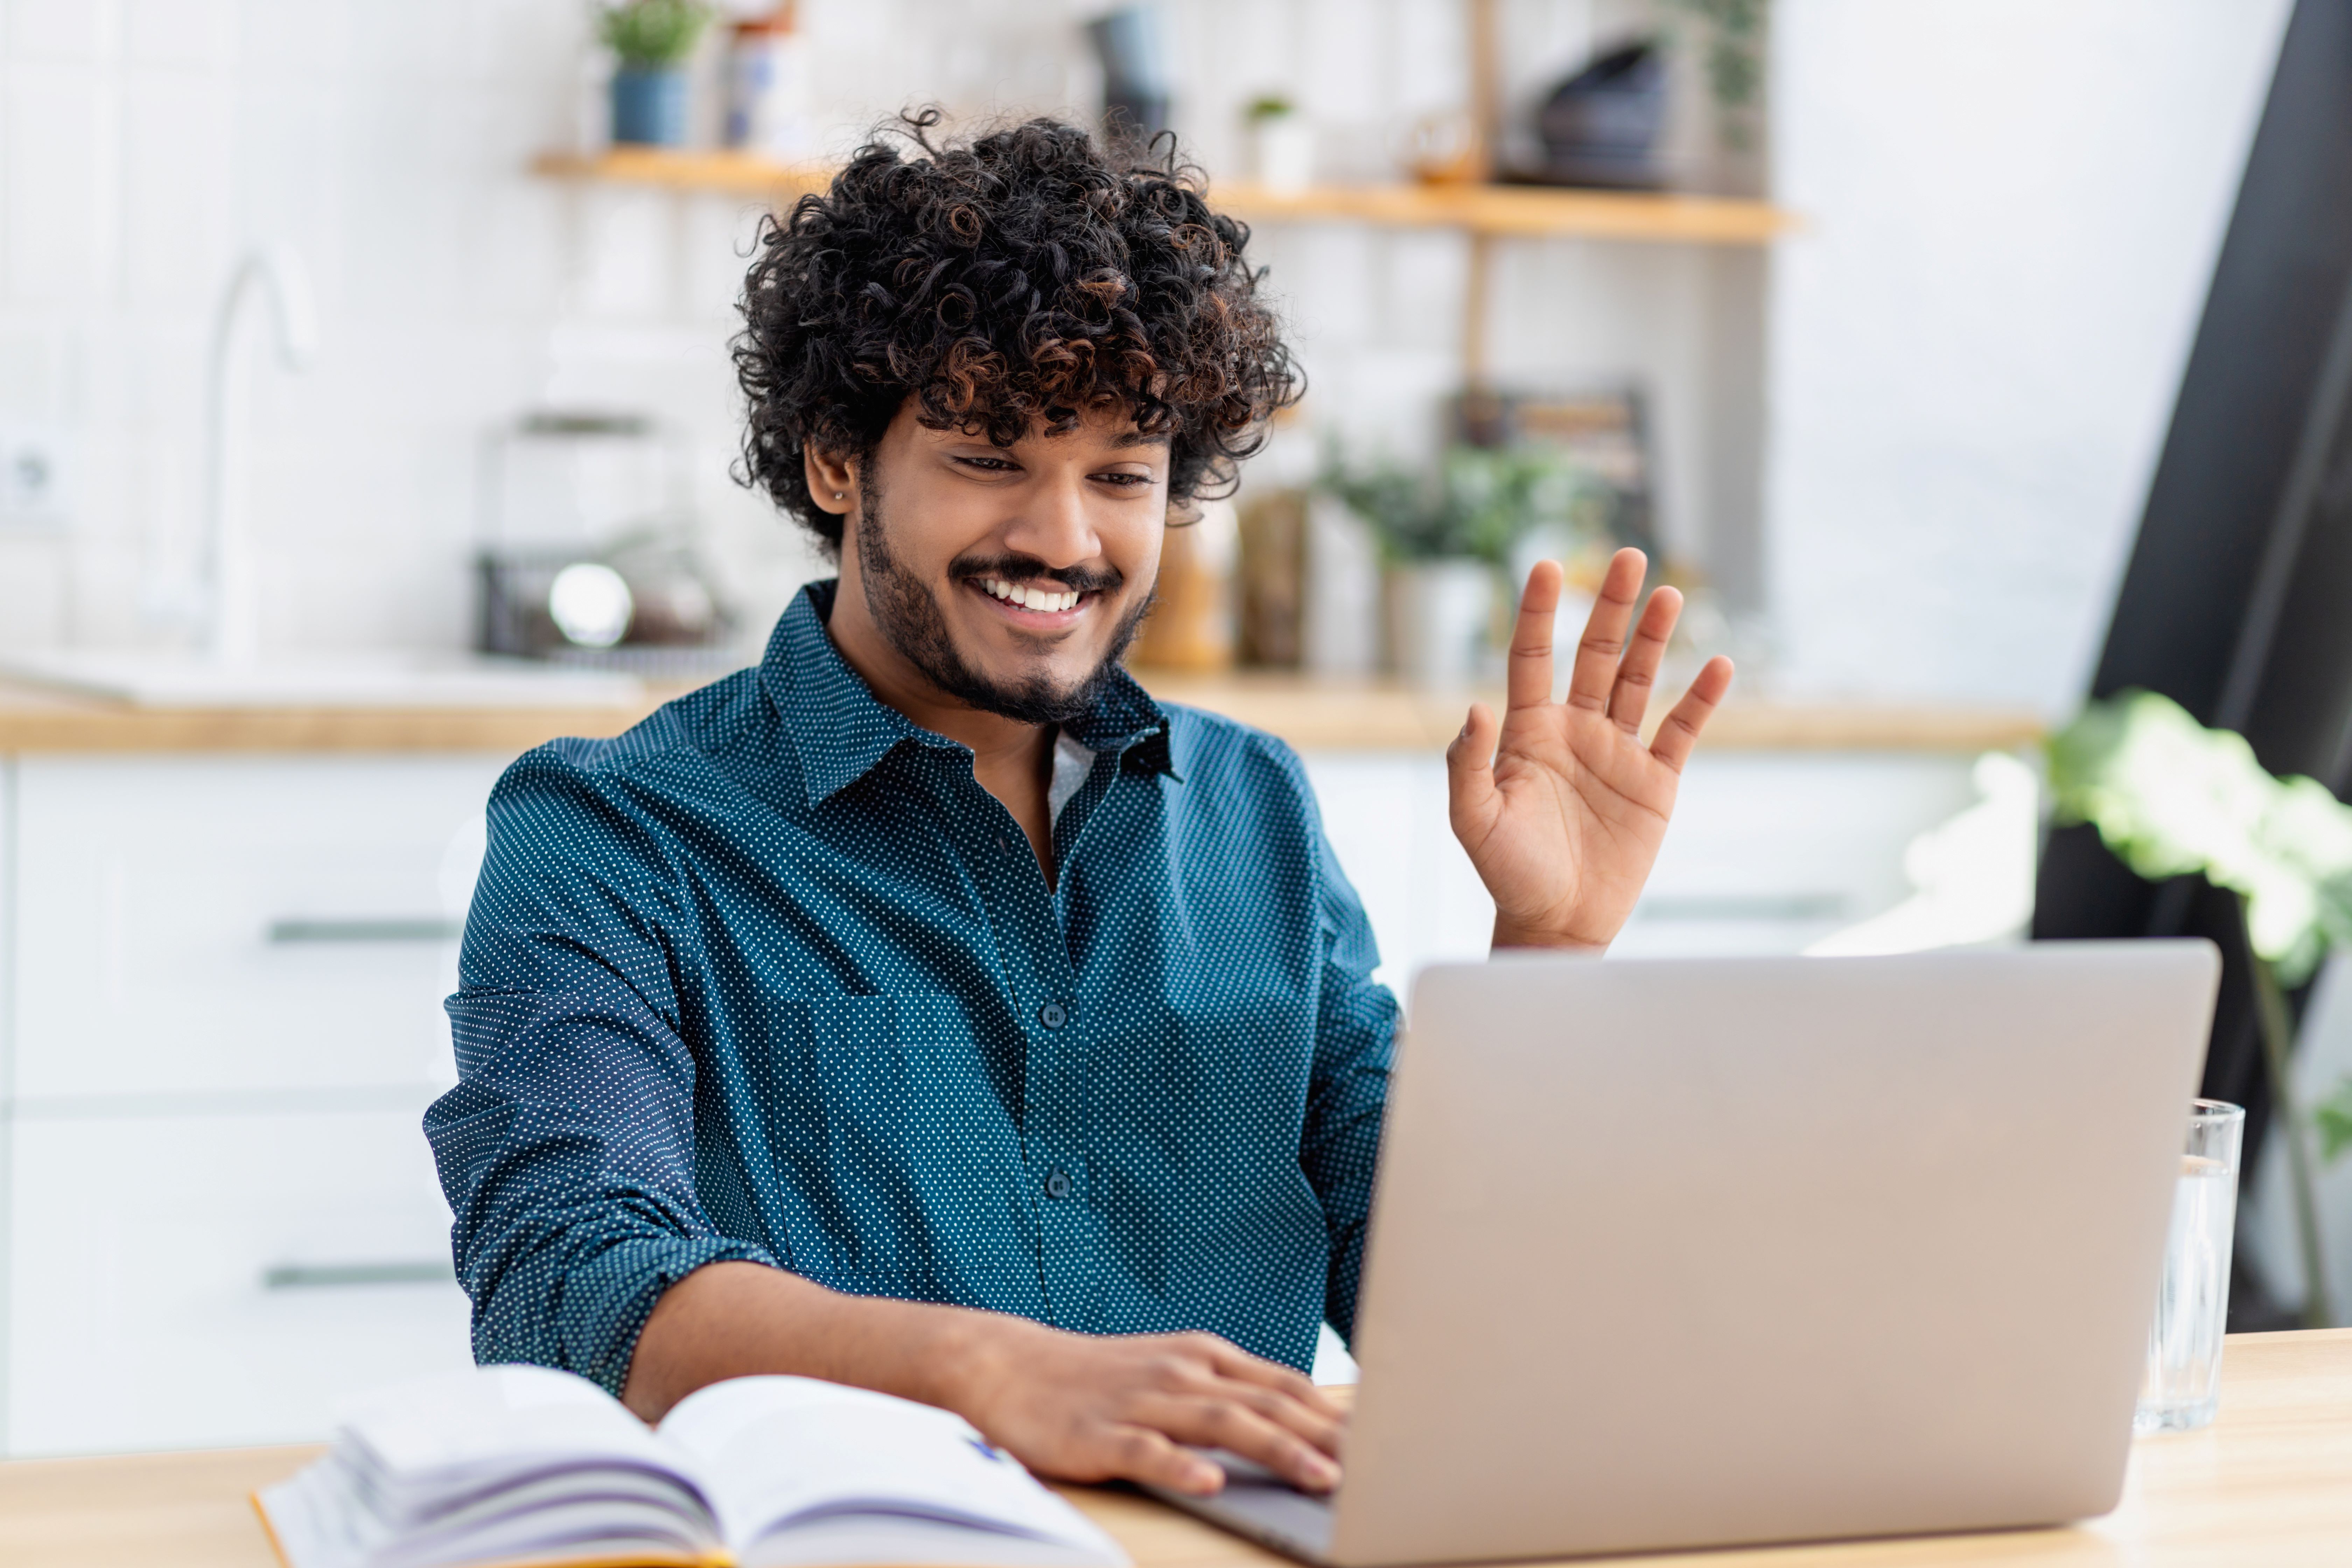 Curly haired man smiling and waving at laptop